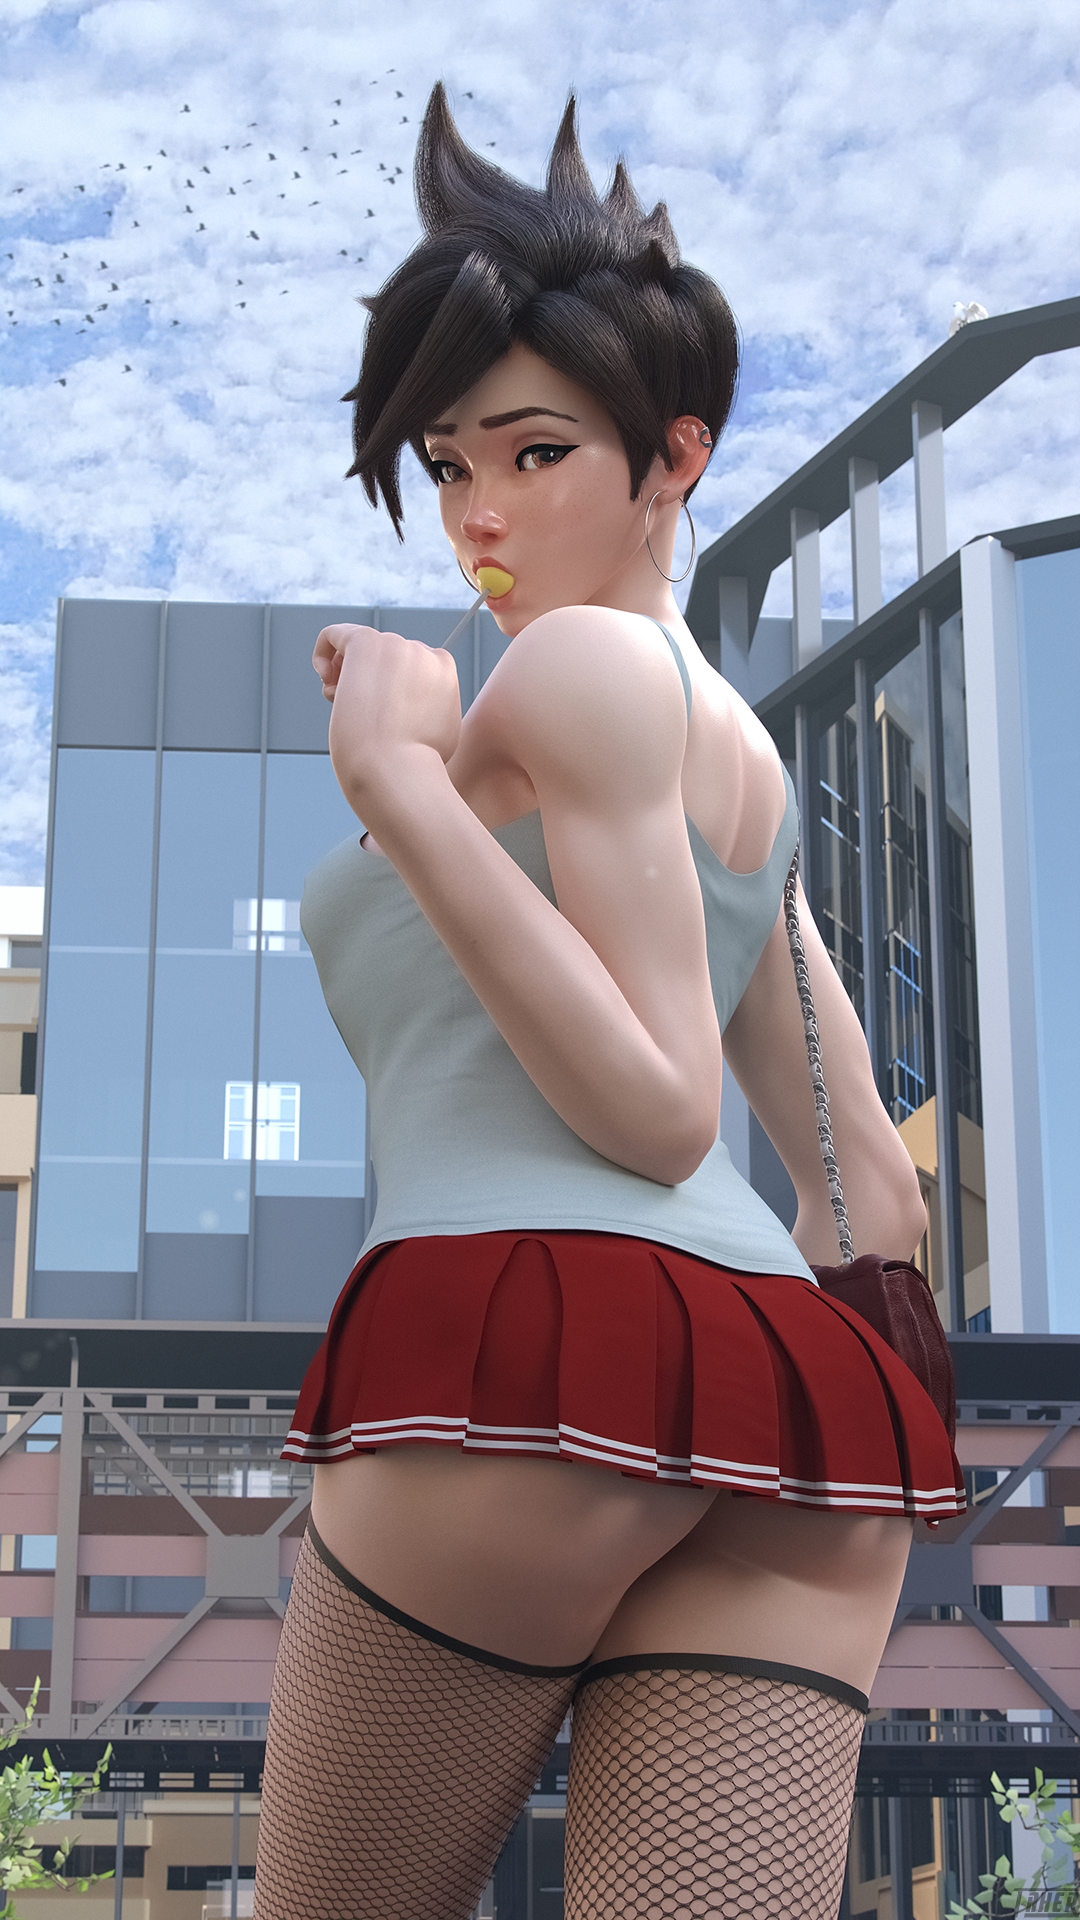 Tracer:   Thanks for agreeing to go shopping with me  Overwatch Tracer Short Hair Tall Girl Small Tits Bubble Butt Lolipop Fishnet Stockings Nudity Partially_clothed Handbag Miniskirt